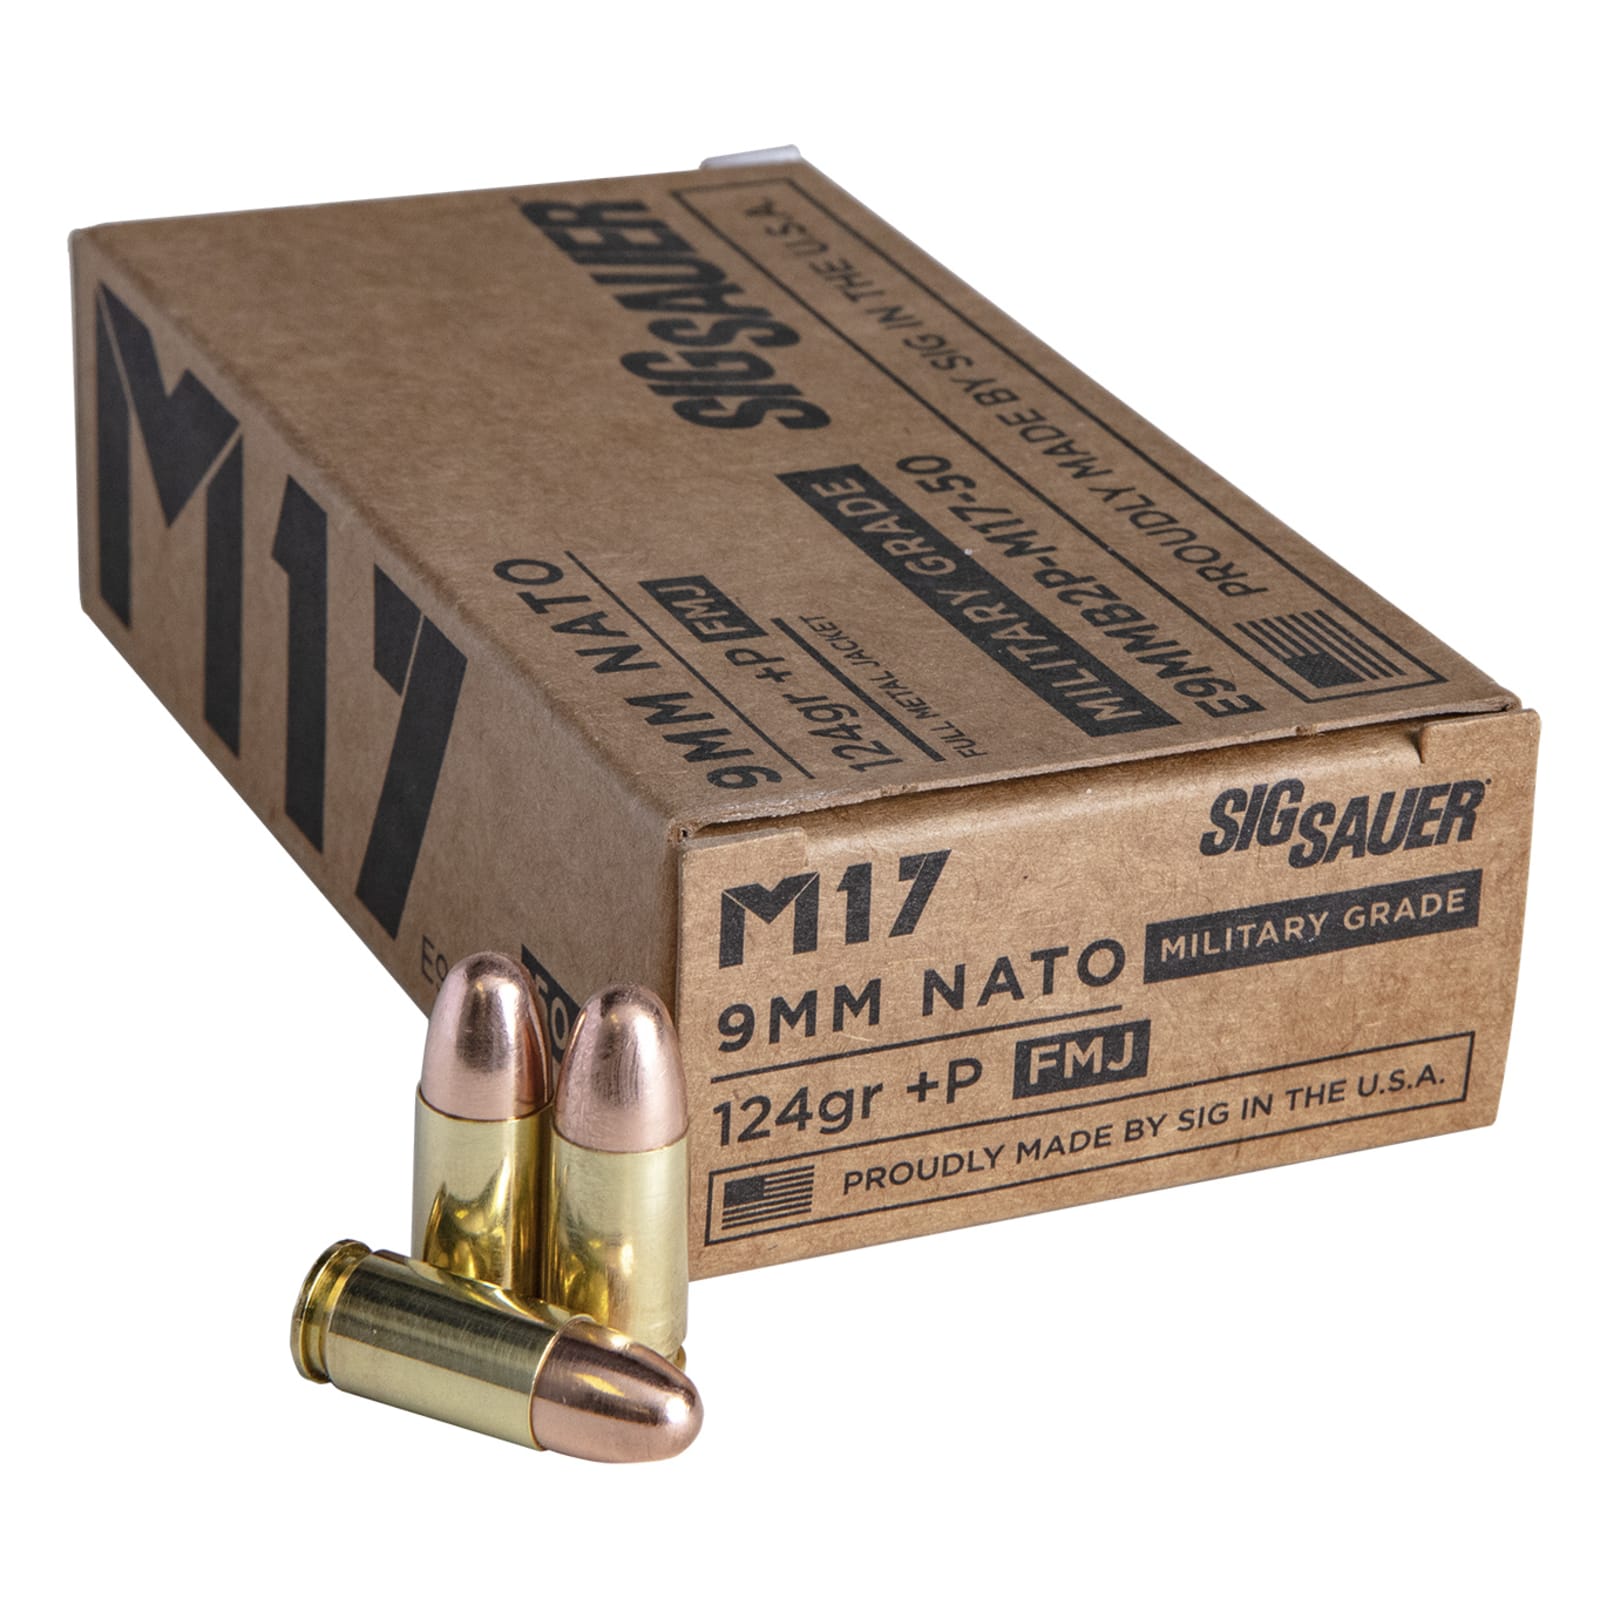 Elite Performance Non-Primed Brass Component Cases by SIG SAUER at Fleet  Farm